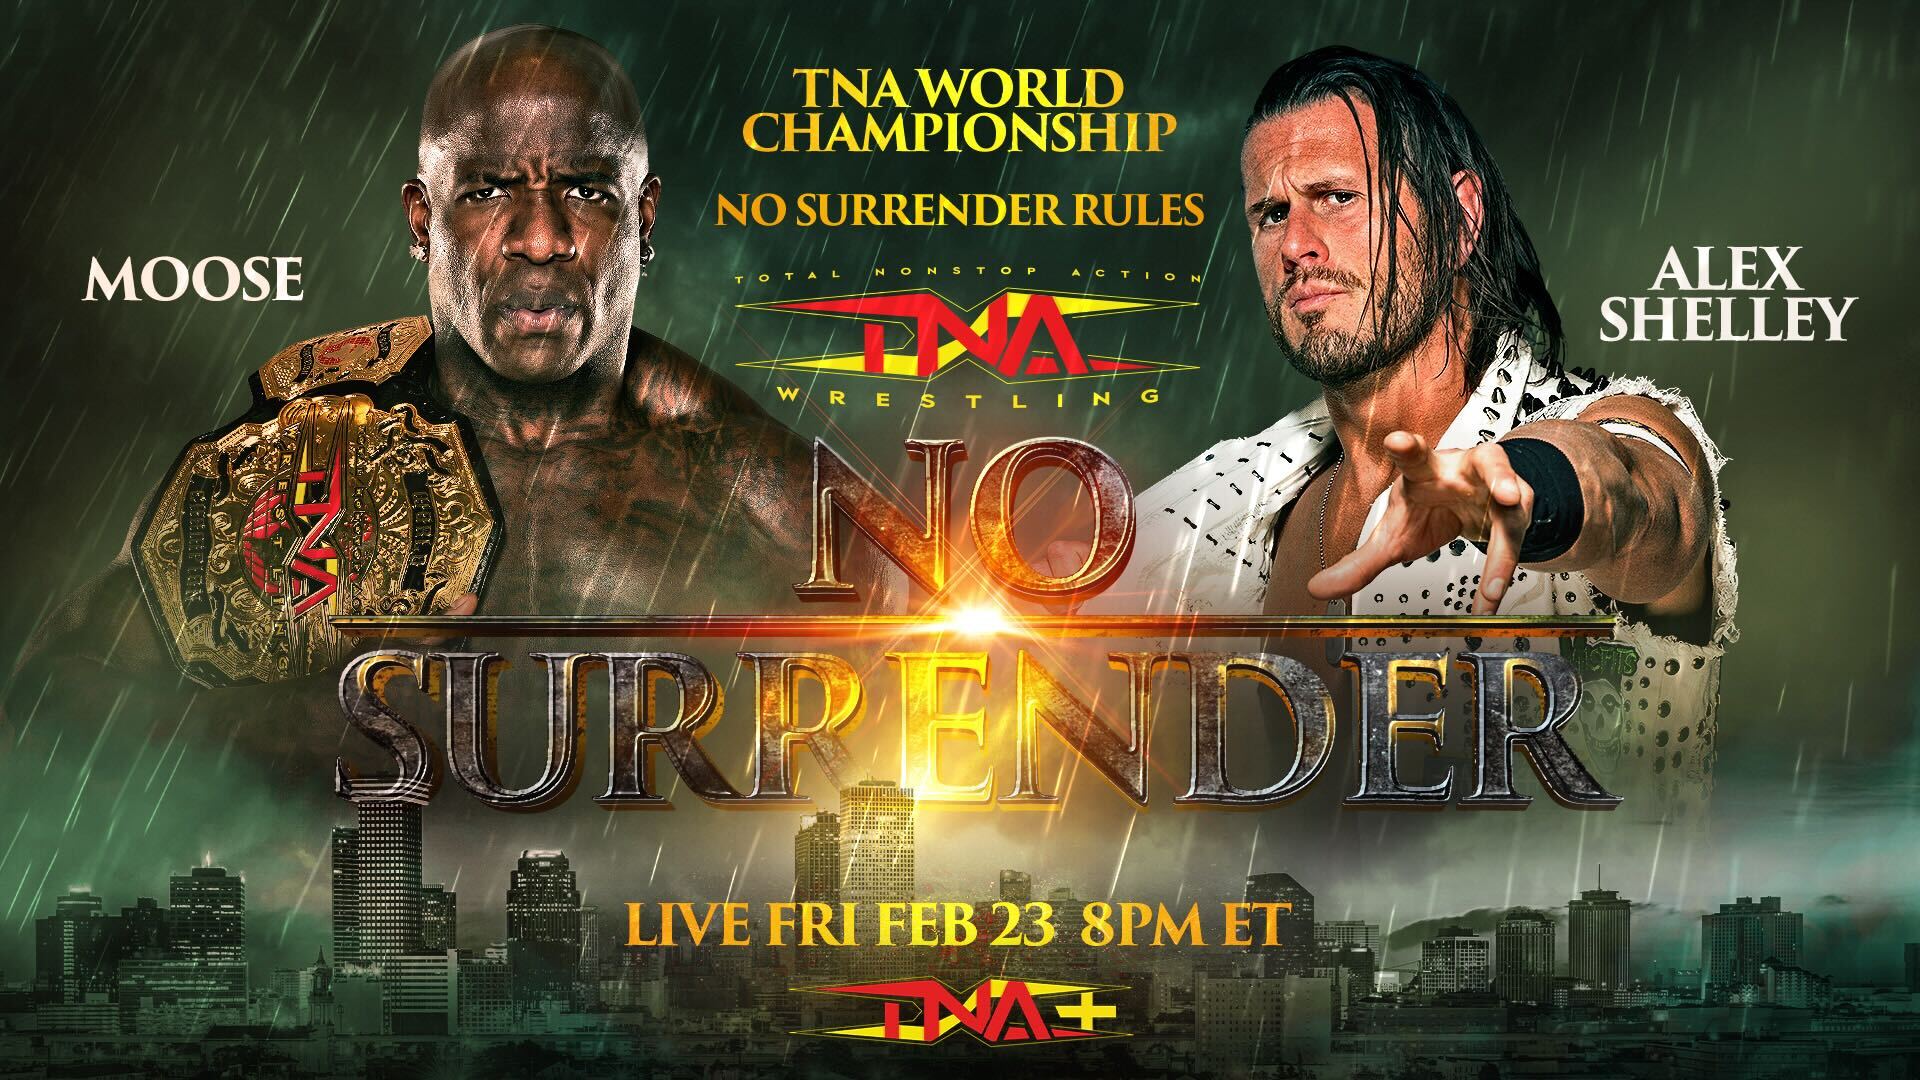 Moose vs. Alex Shelley World Championship Rematch to Be Contested Under No Surrender Rules – TNA Wrestling